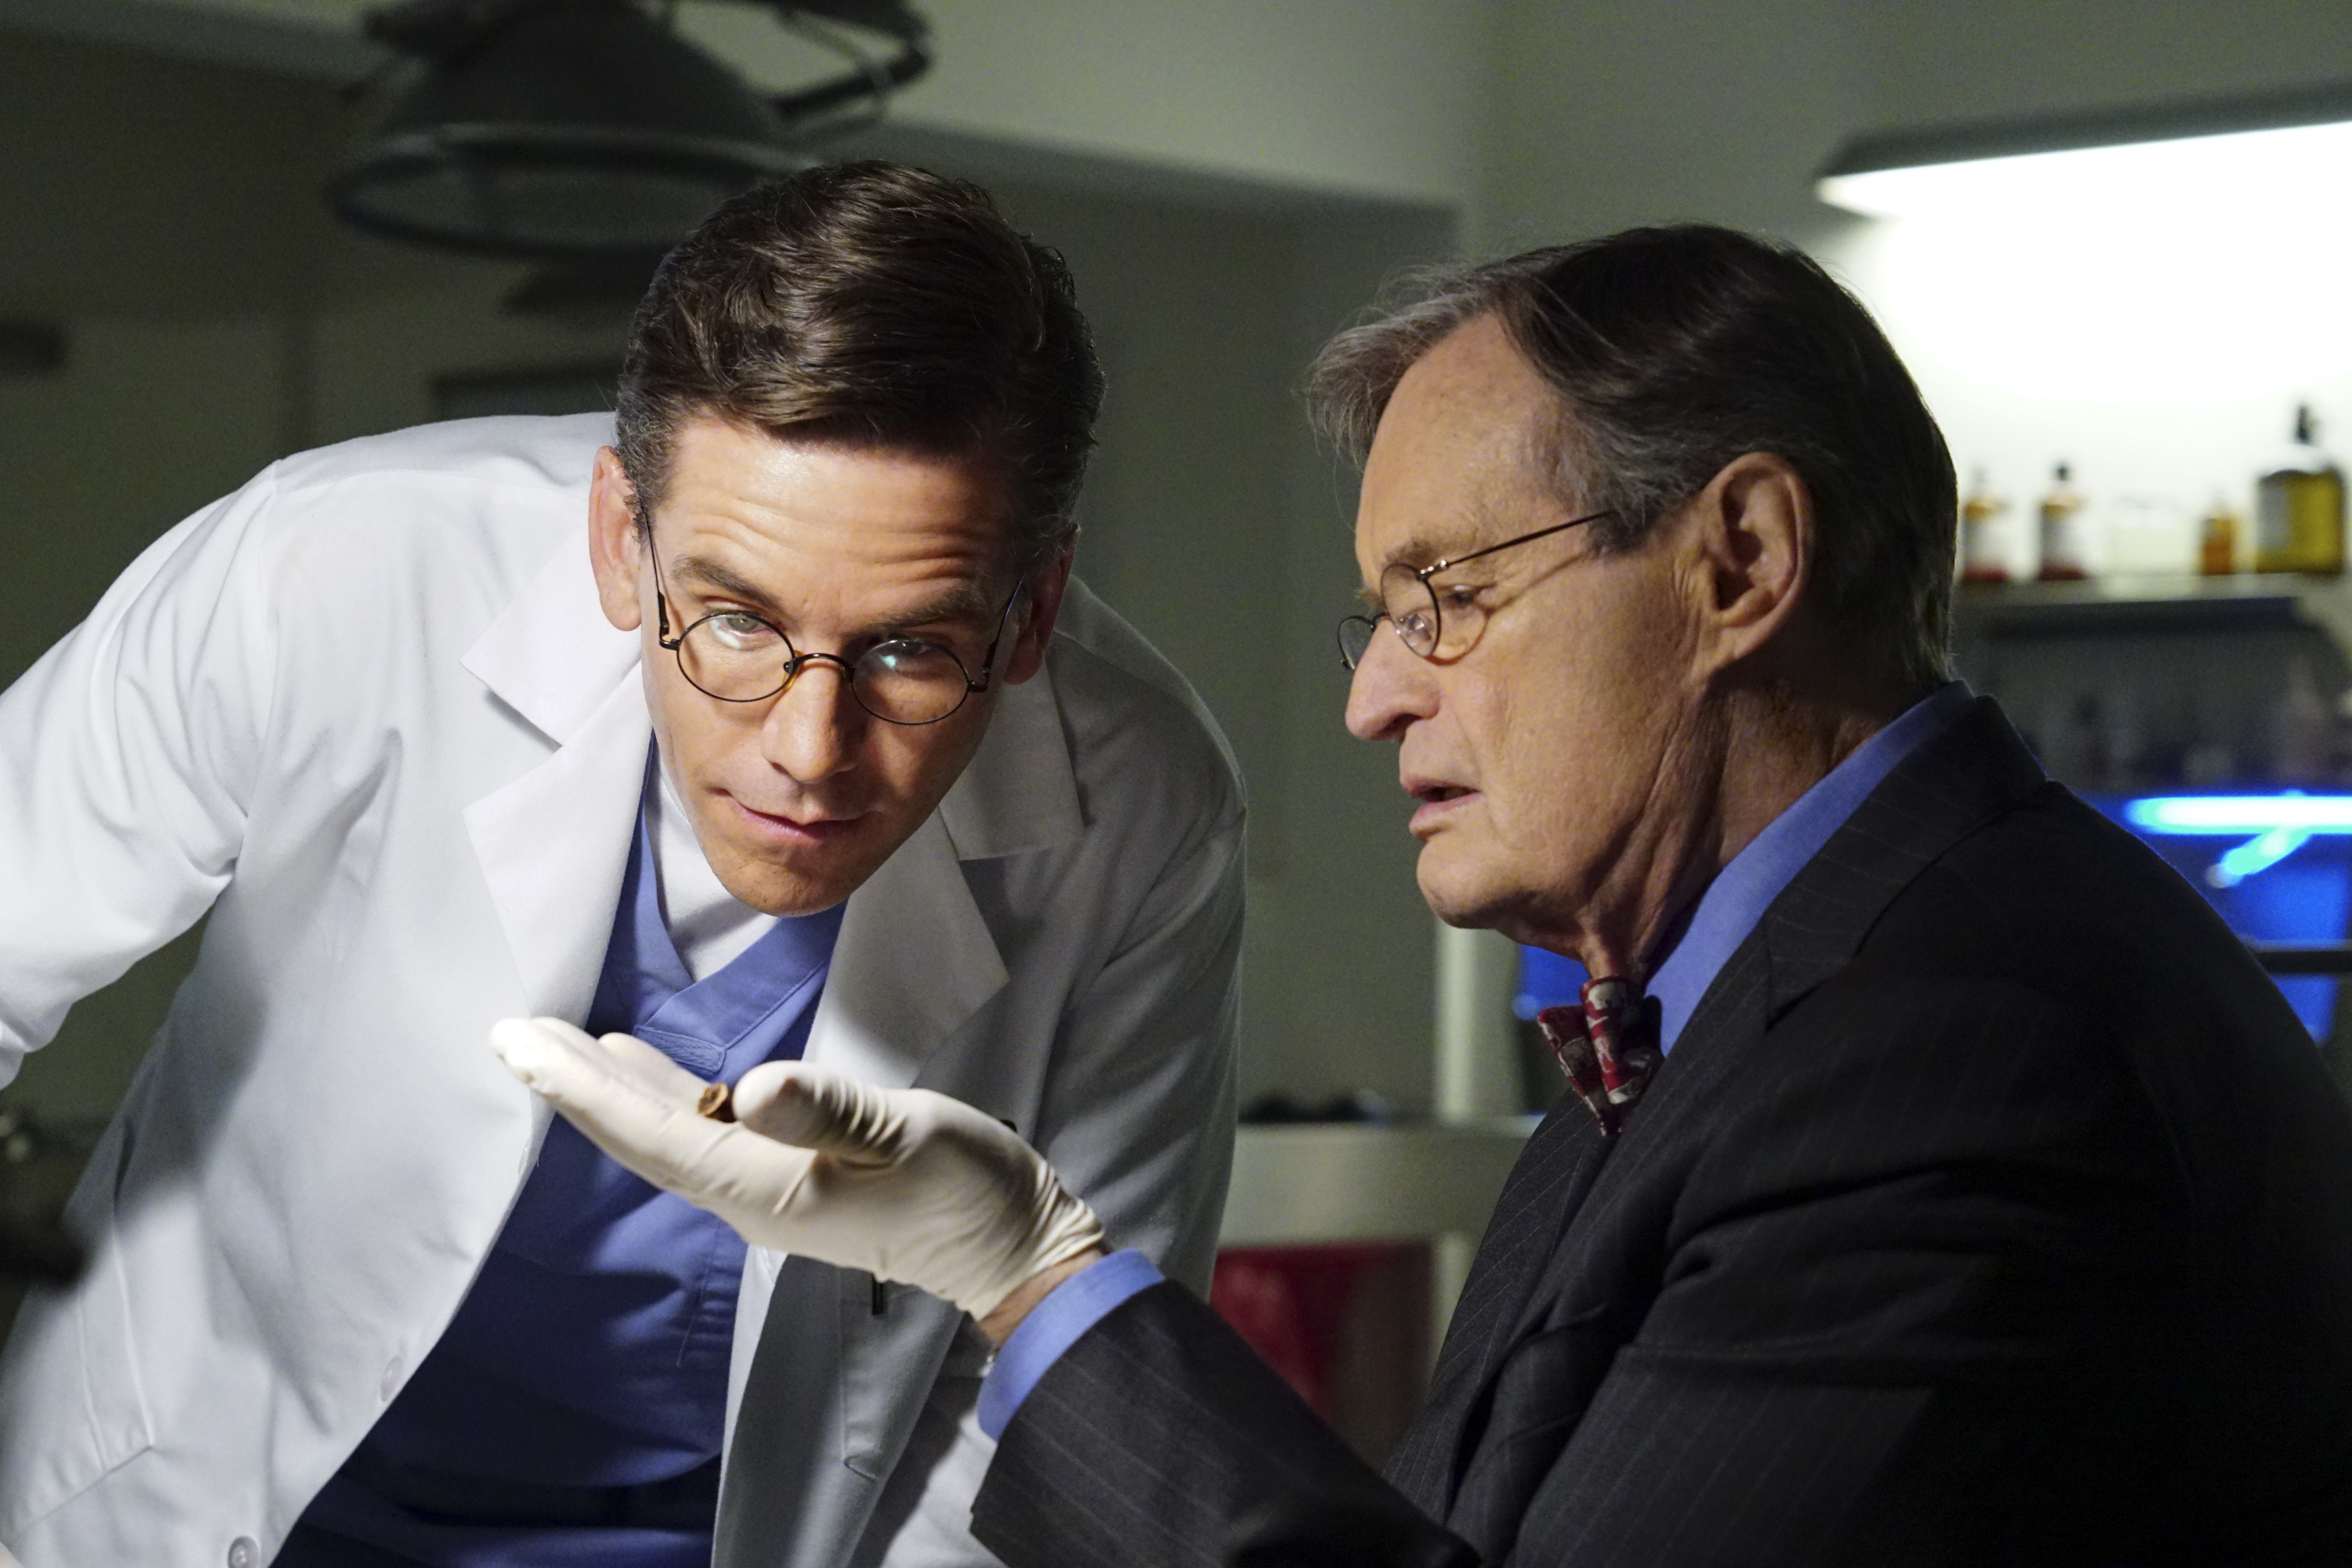 Brian Dietzen and David McCallum during the filming of "NCIS" on February 6, 2018. | Source: Getty Images